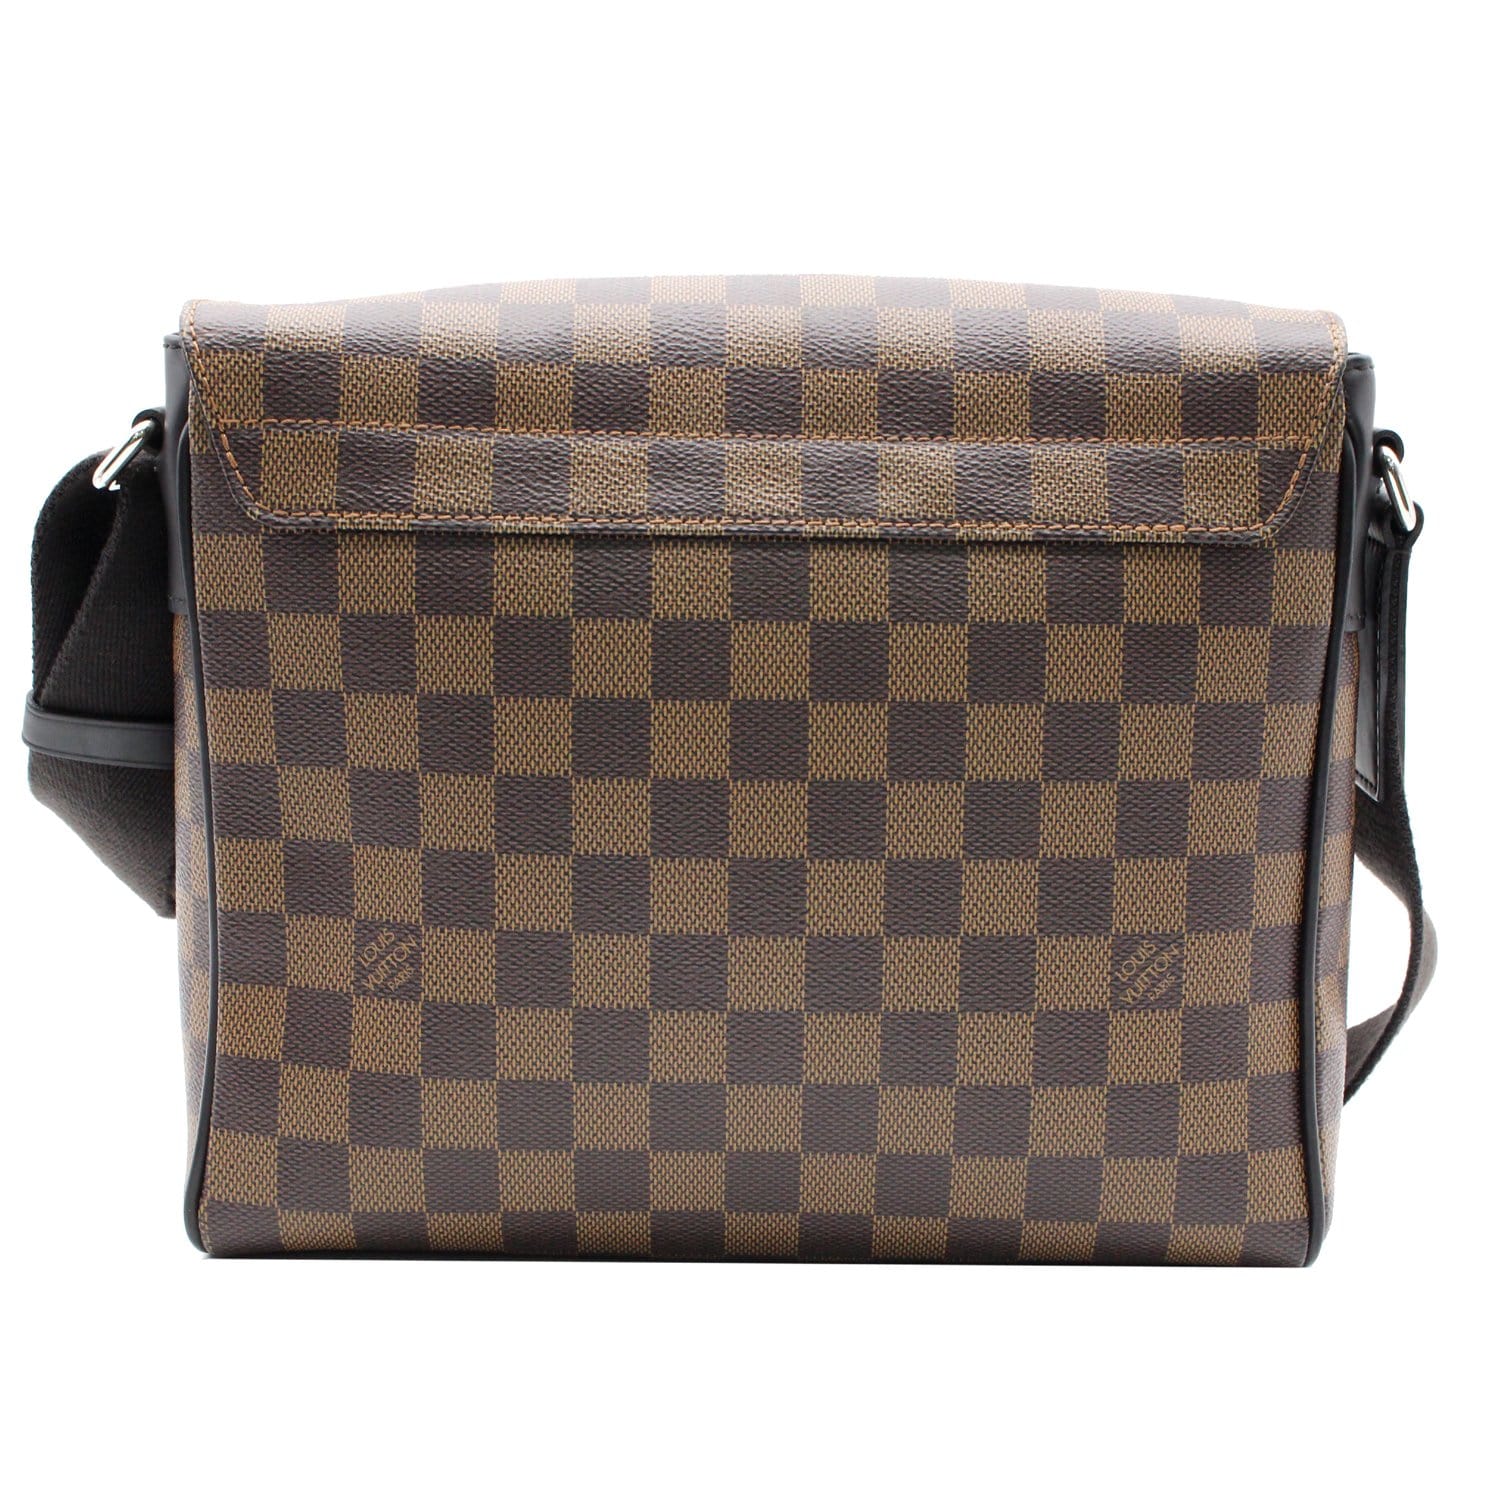 Authentic Louis Vuitton Damier Ebene Canvas with Brown Leather